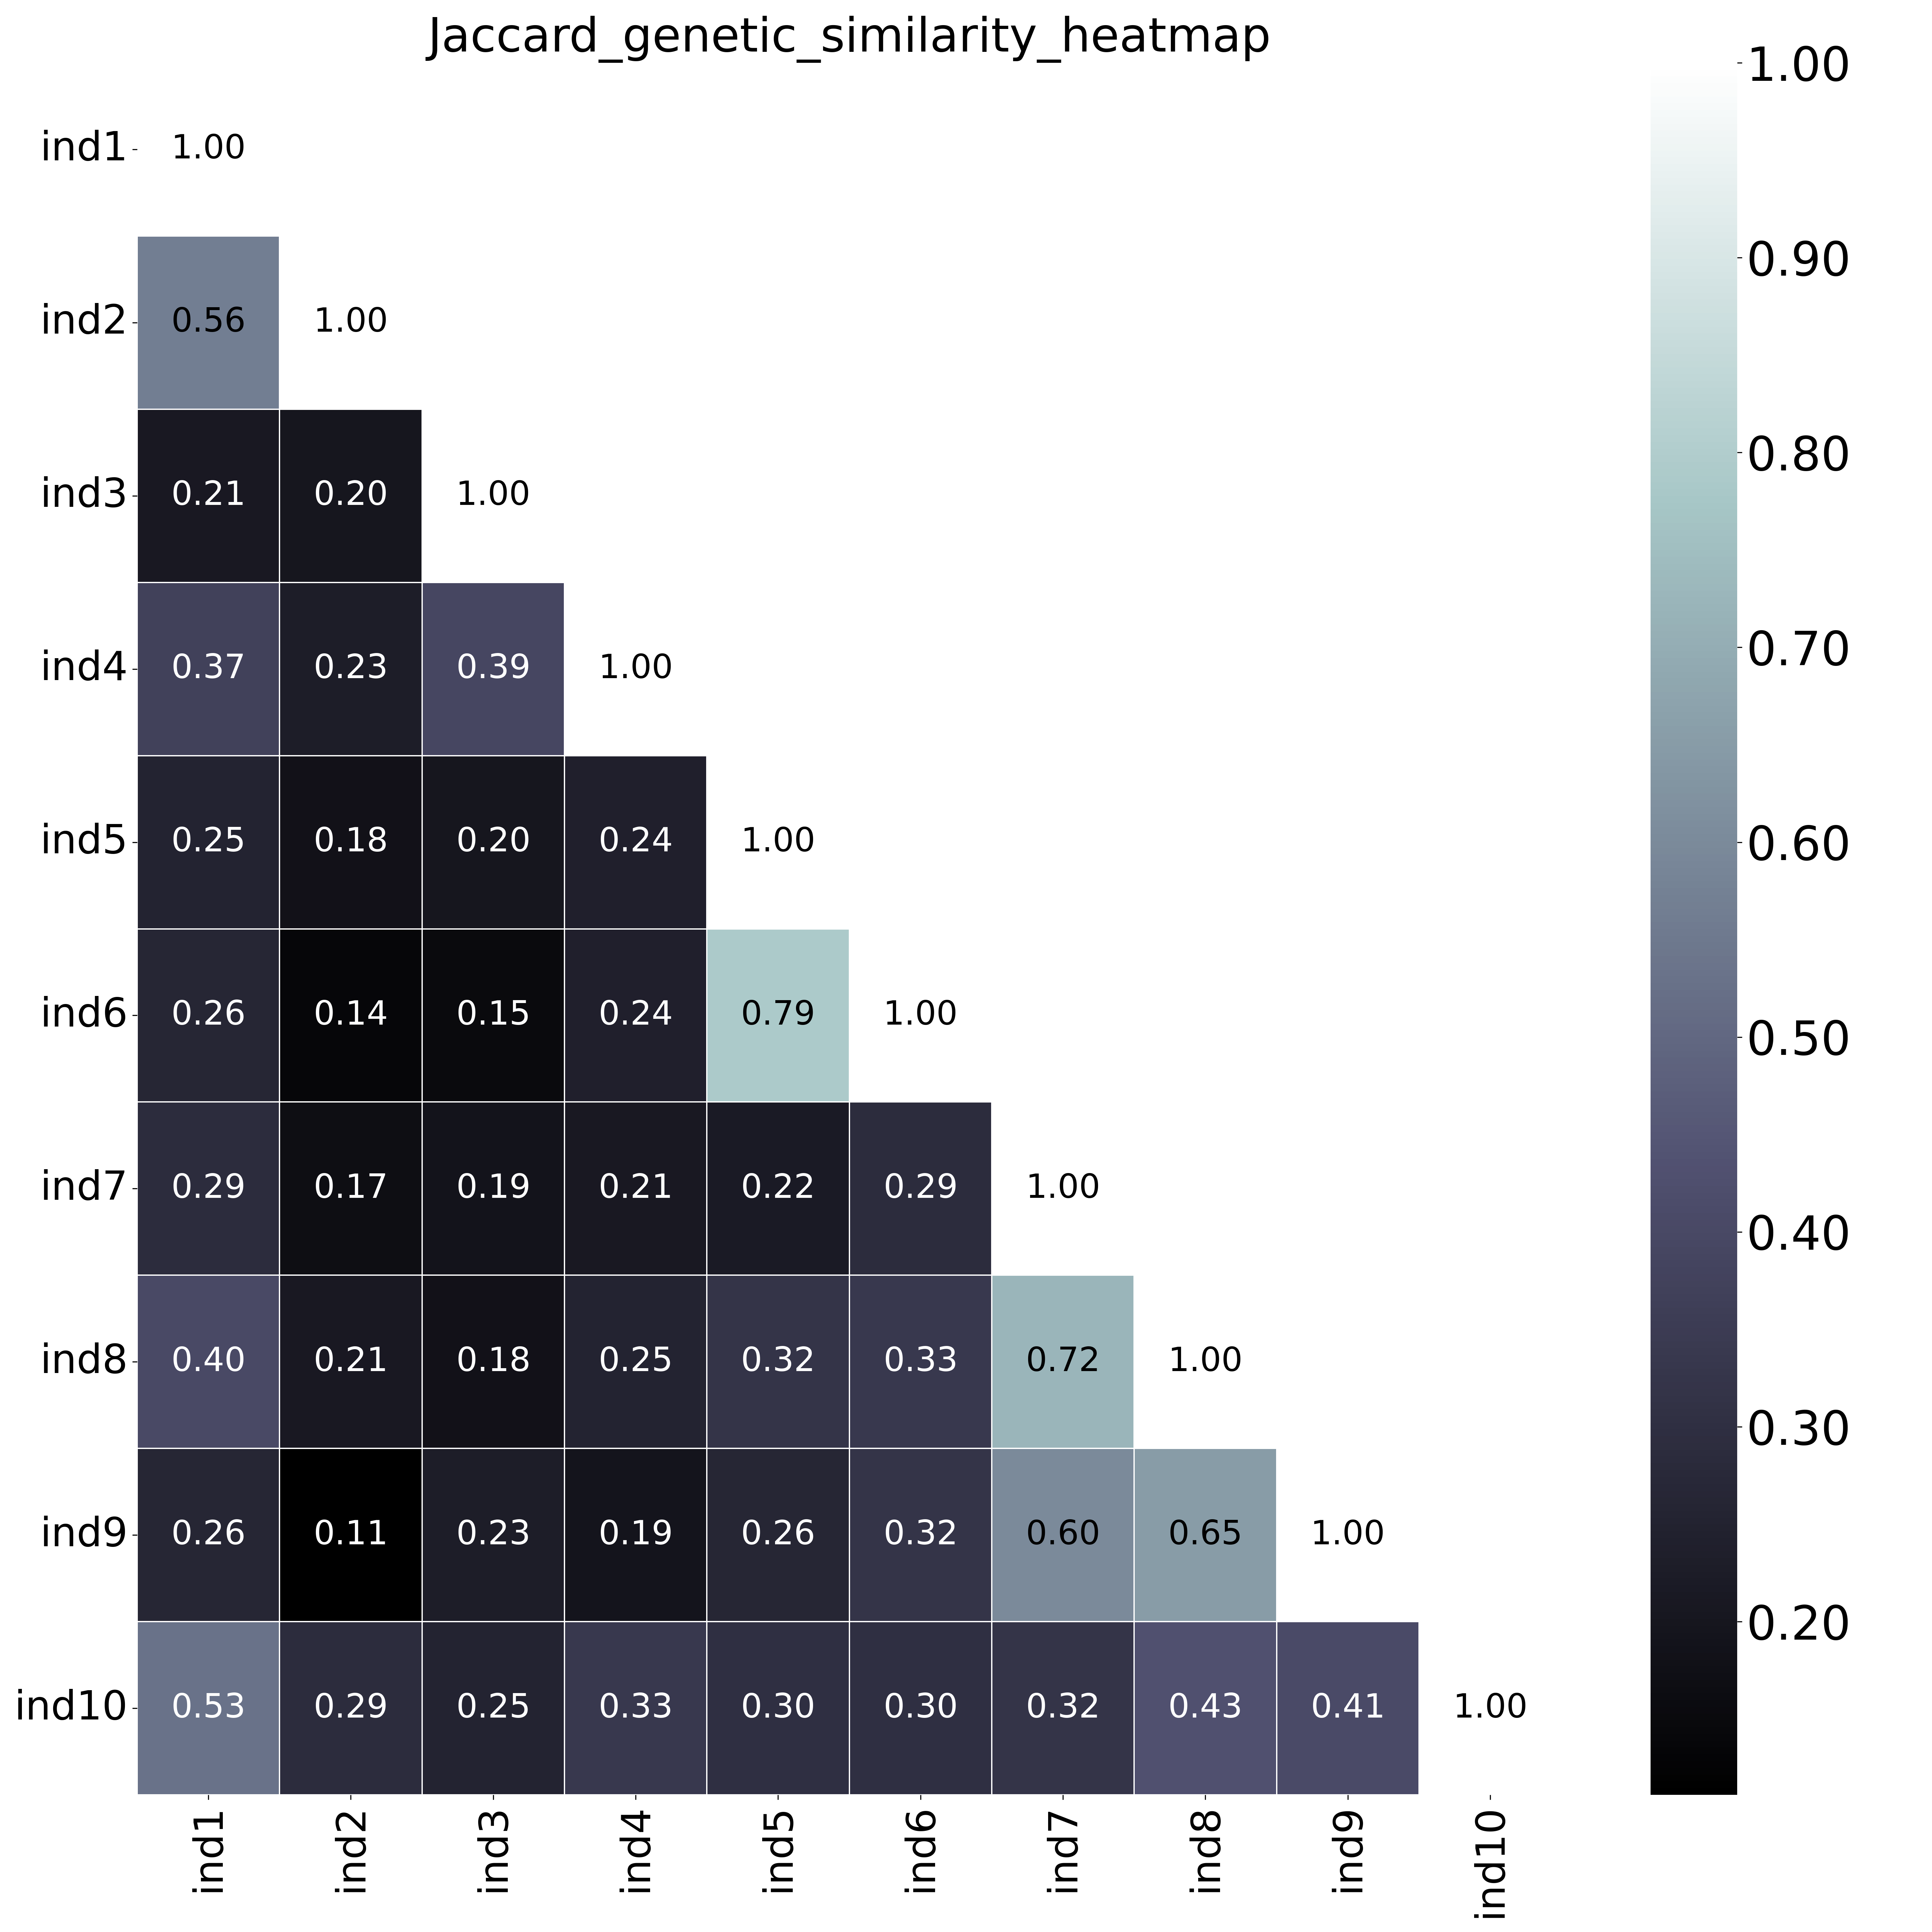 ../_images/Jaccard_genetic_similarity_heatmap_annot_individual_CU.png